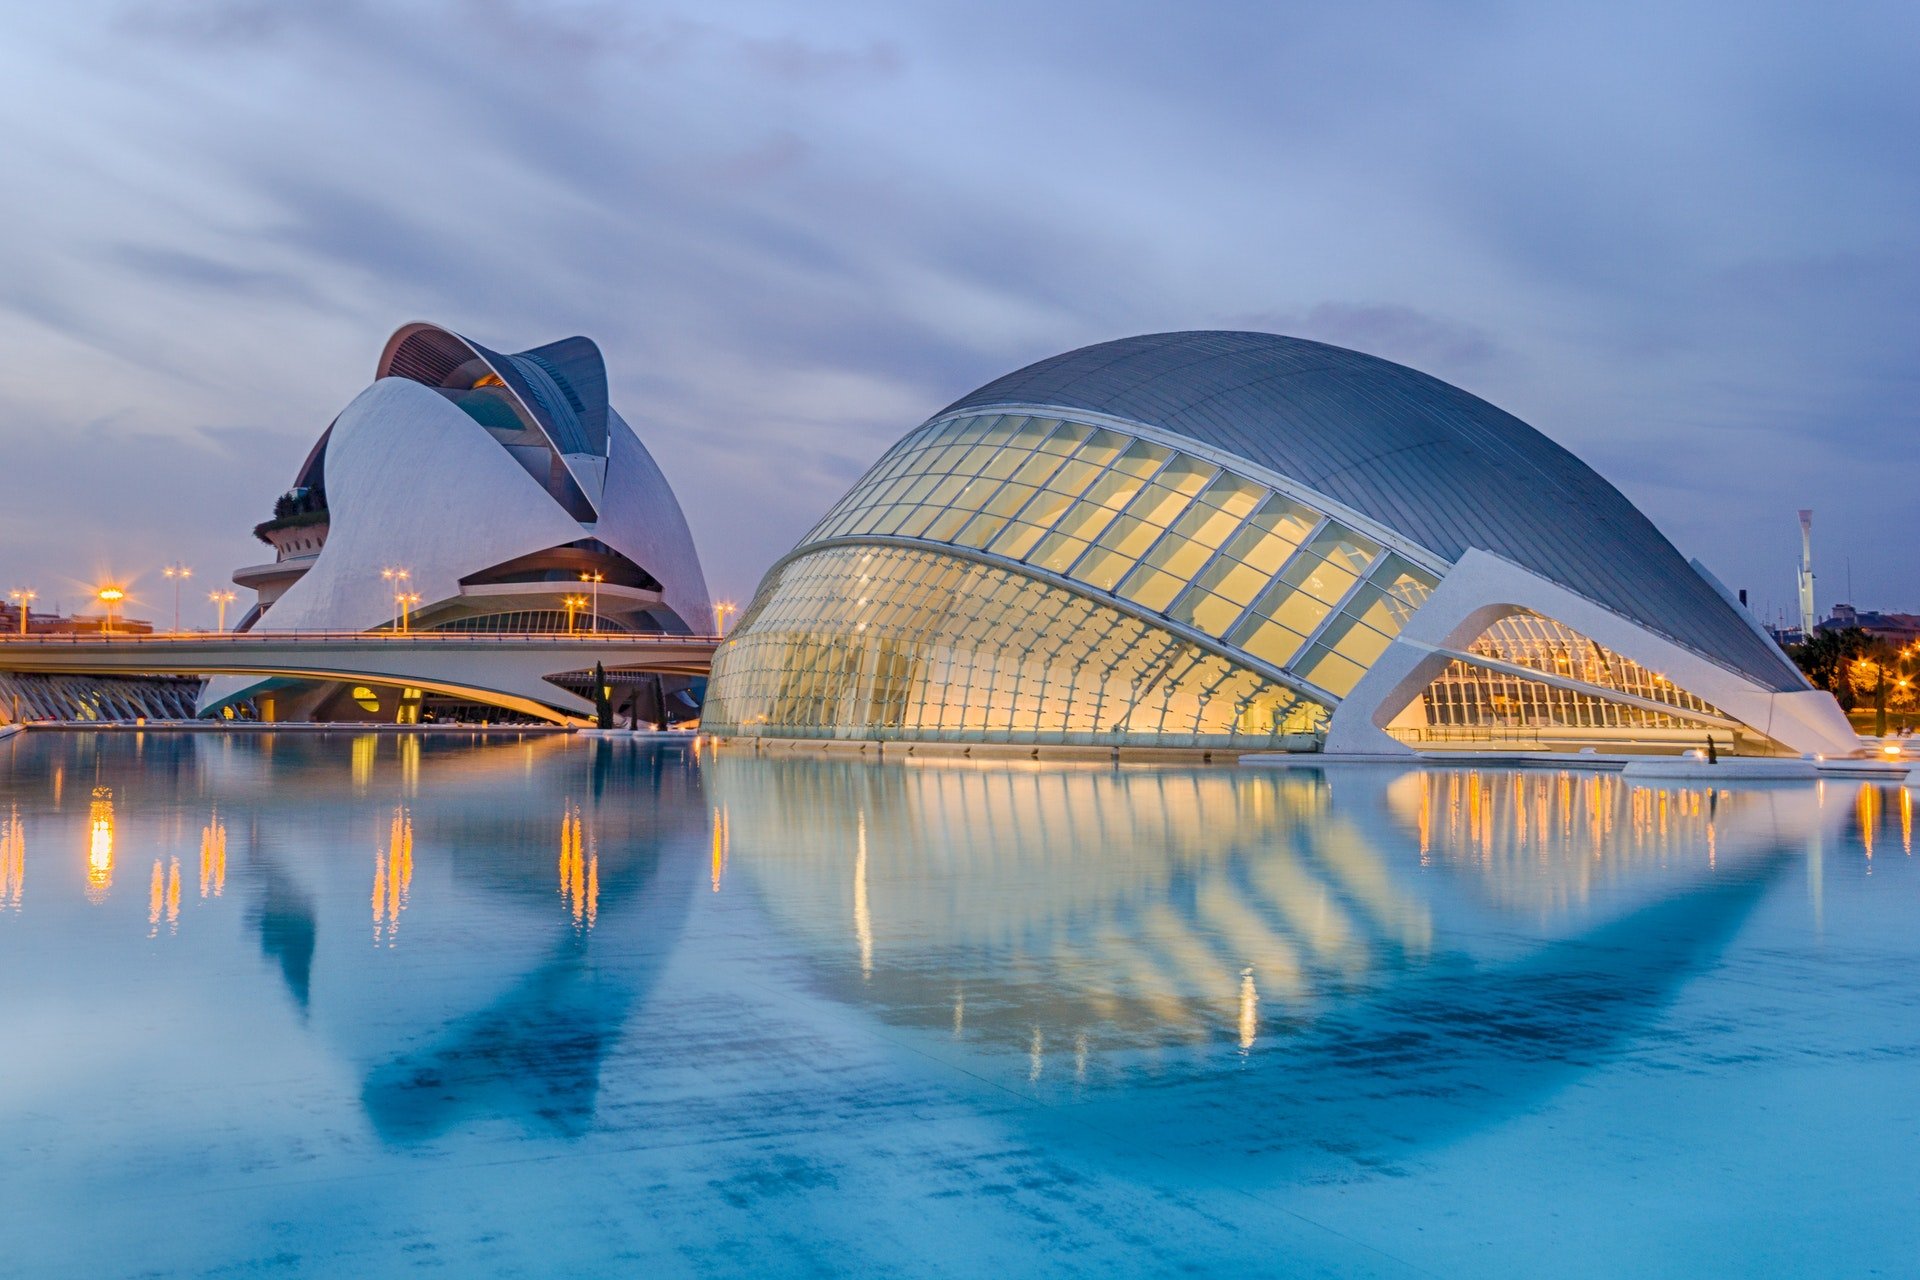 27 Inspiring Photos Of Architecture In The Blue Hour